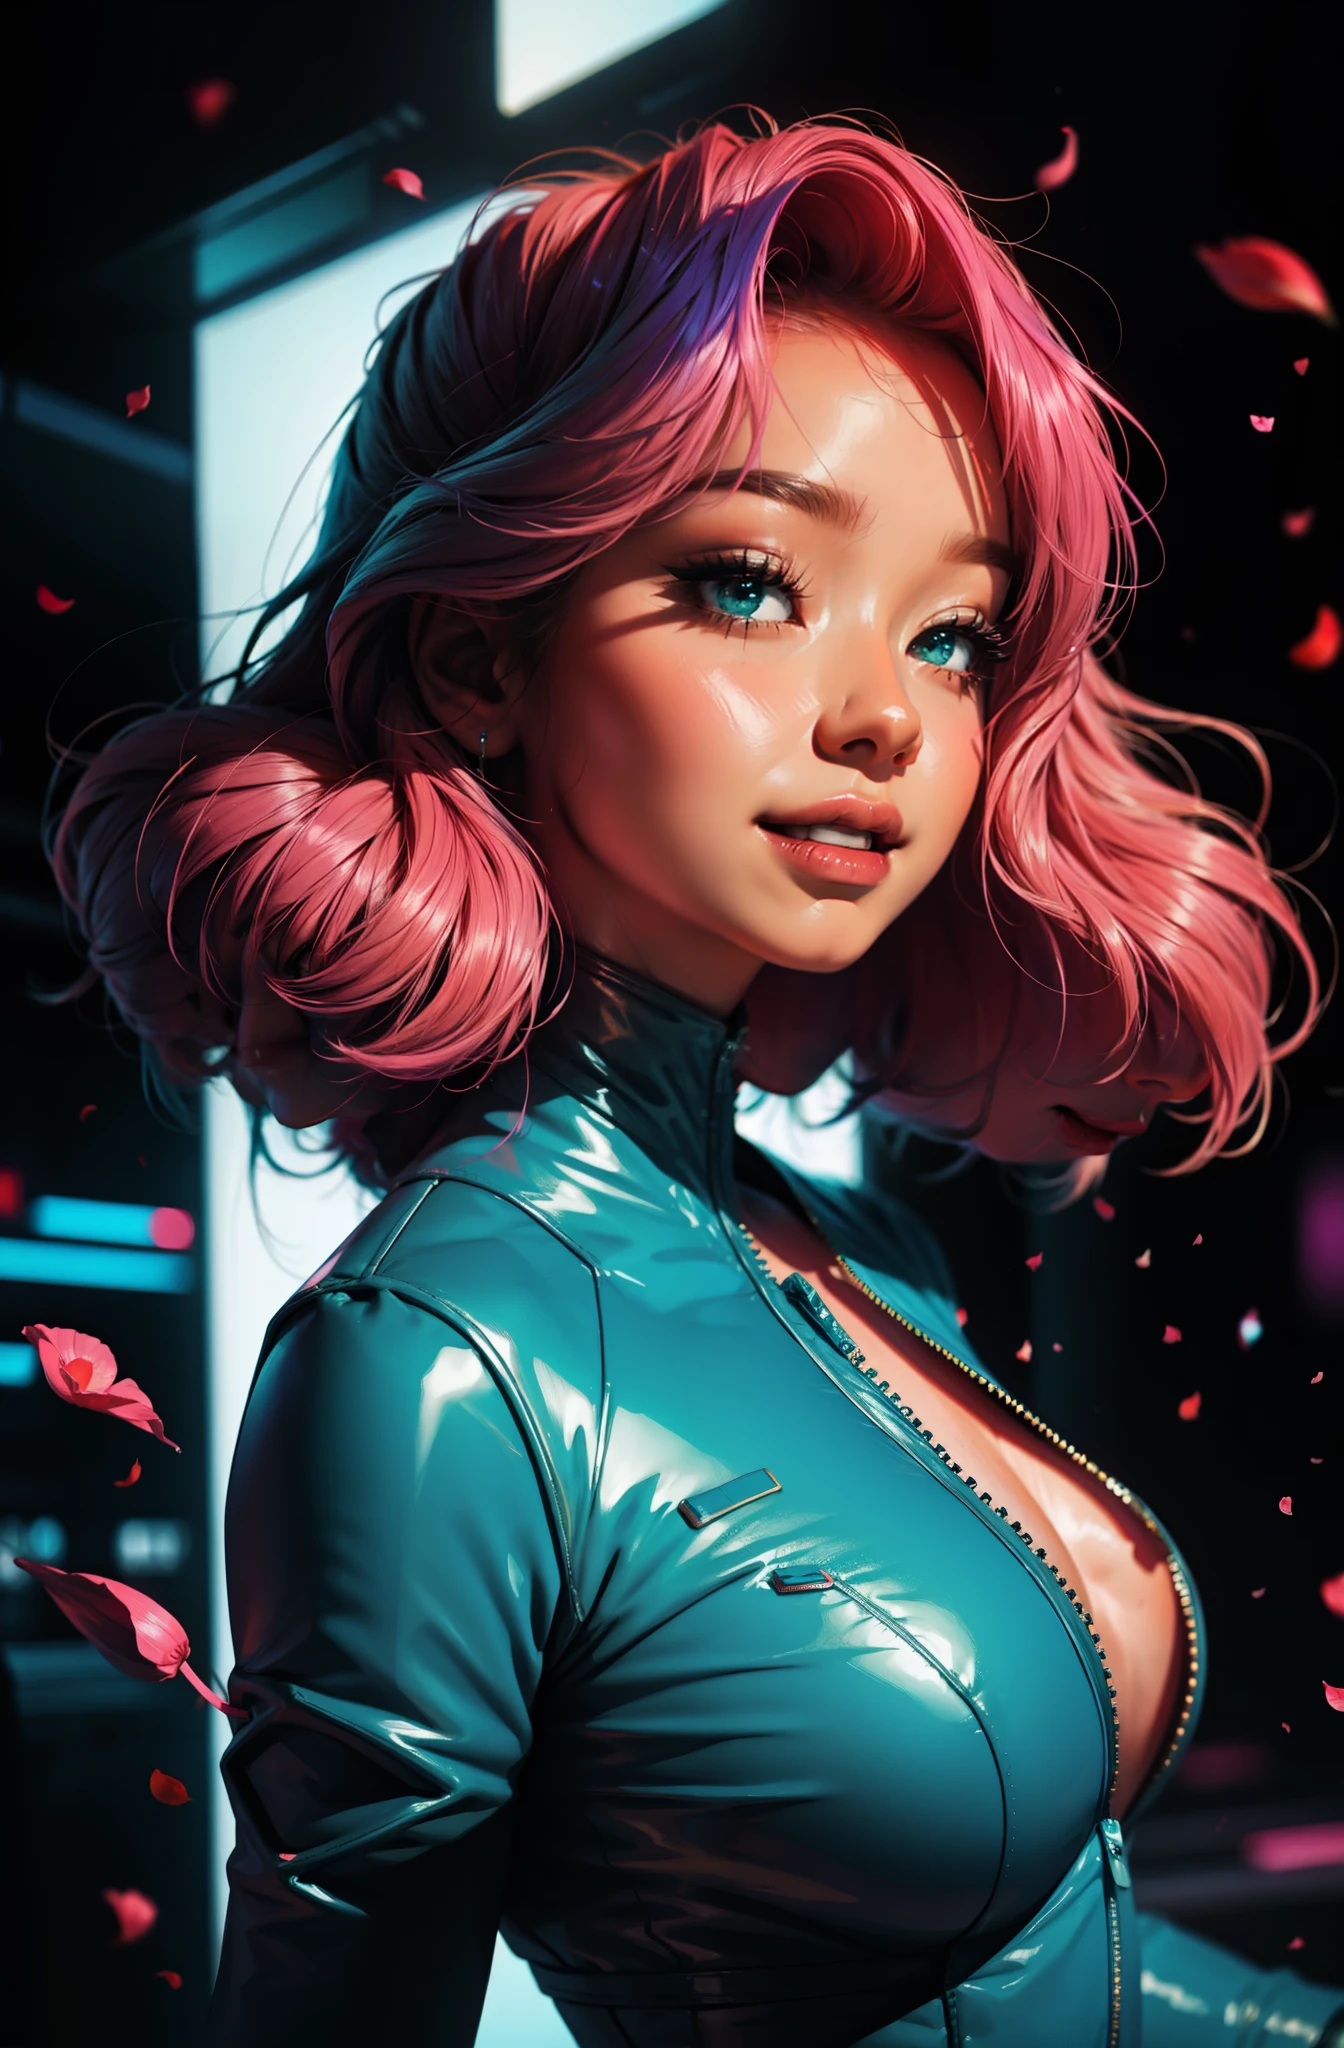 cyberpunk female woman wearing (chromatic accents:1.1), sleek transparent bodysuit, side view turning to face camera, (Petal Blush, Lagoon Blue color background:1.3), amazing smile, looking at camera, 1980’s style poster